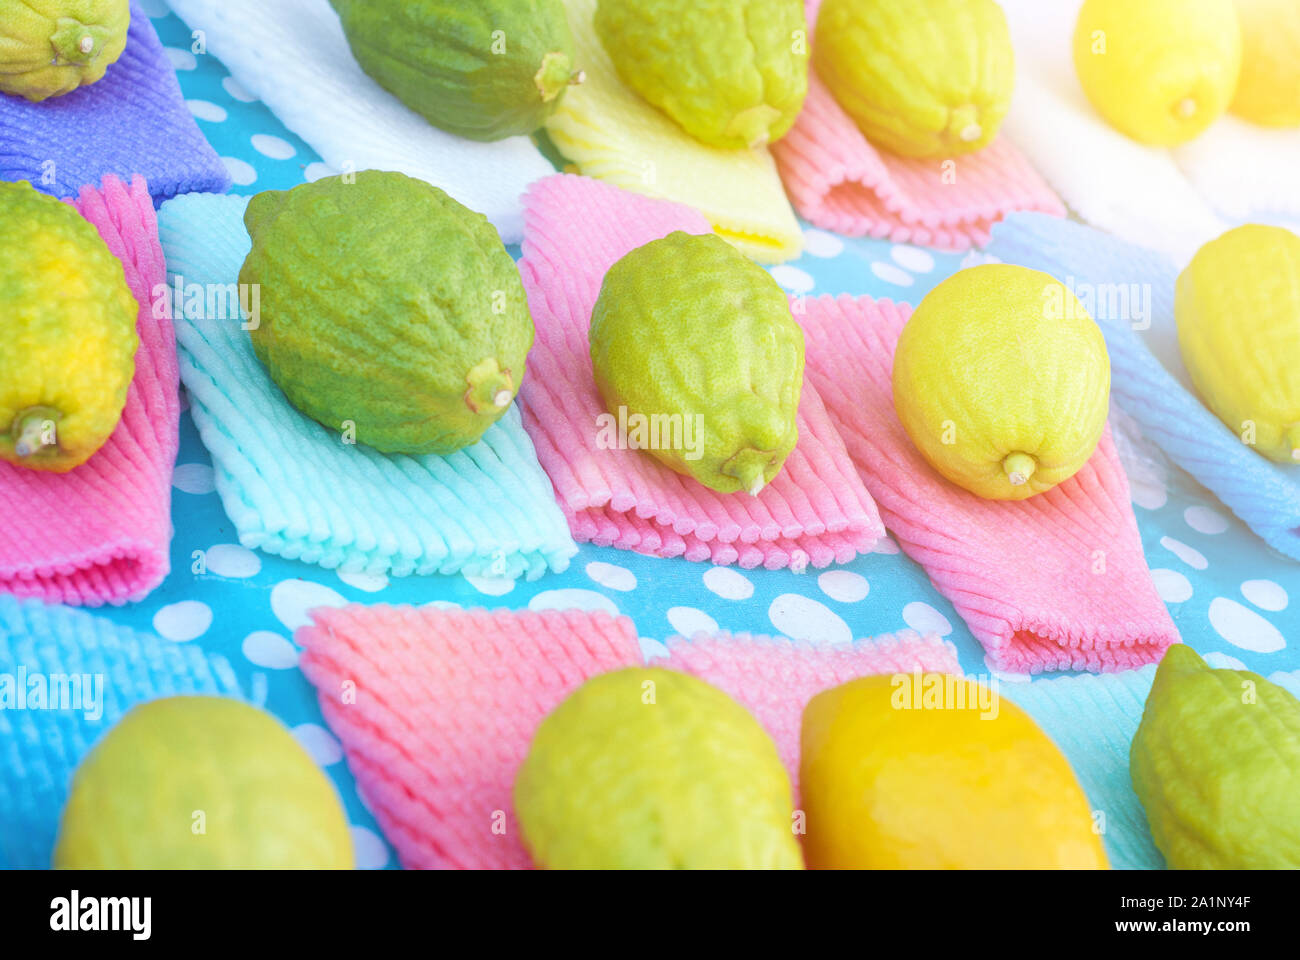 Jewish festival of Sukkot. Traditional market before the holiday of Sukkot.Etrog yellow citron Traditional symbol-One of The four species. Stock Photo